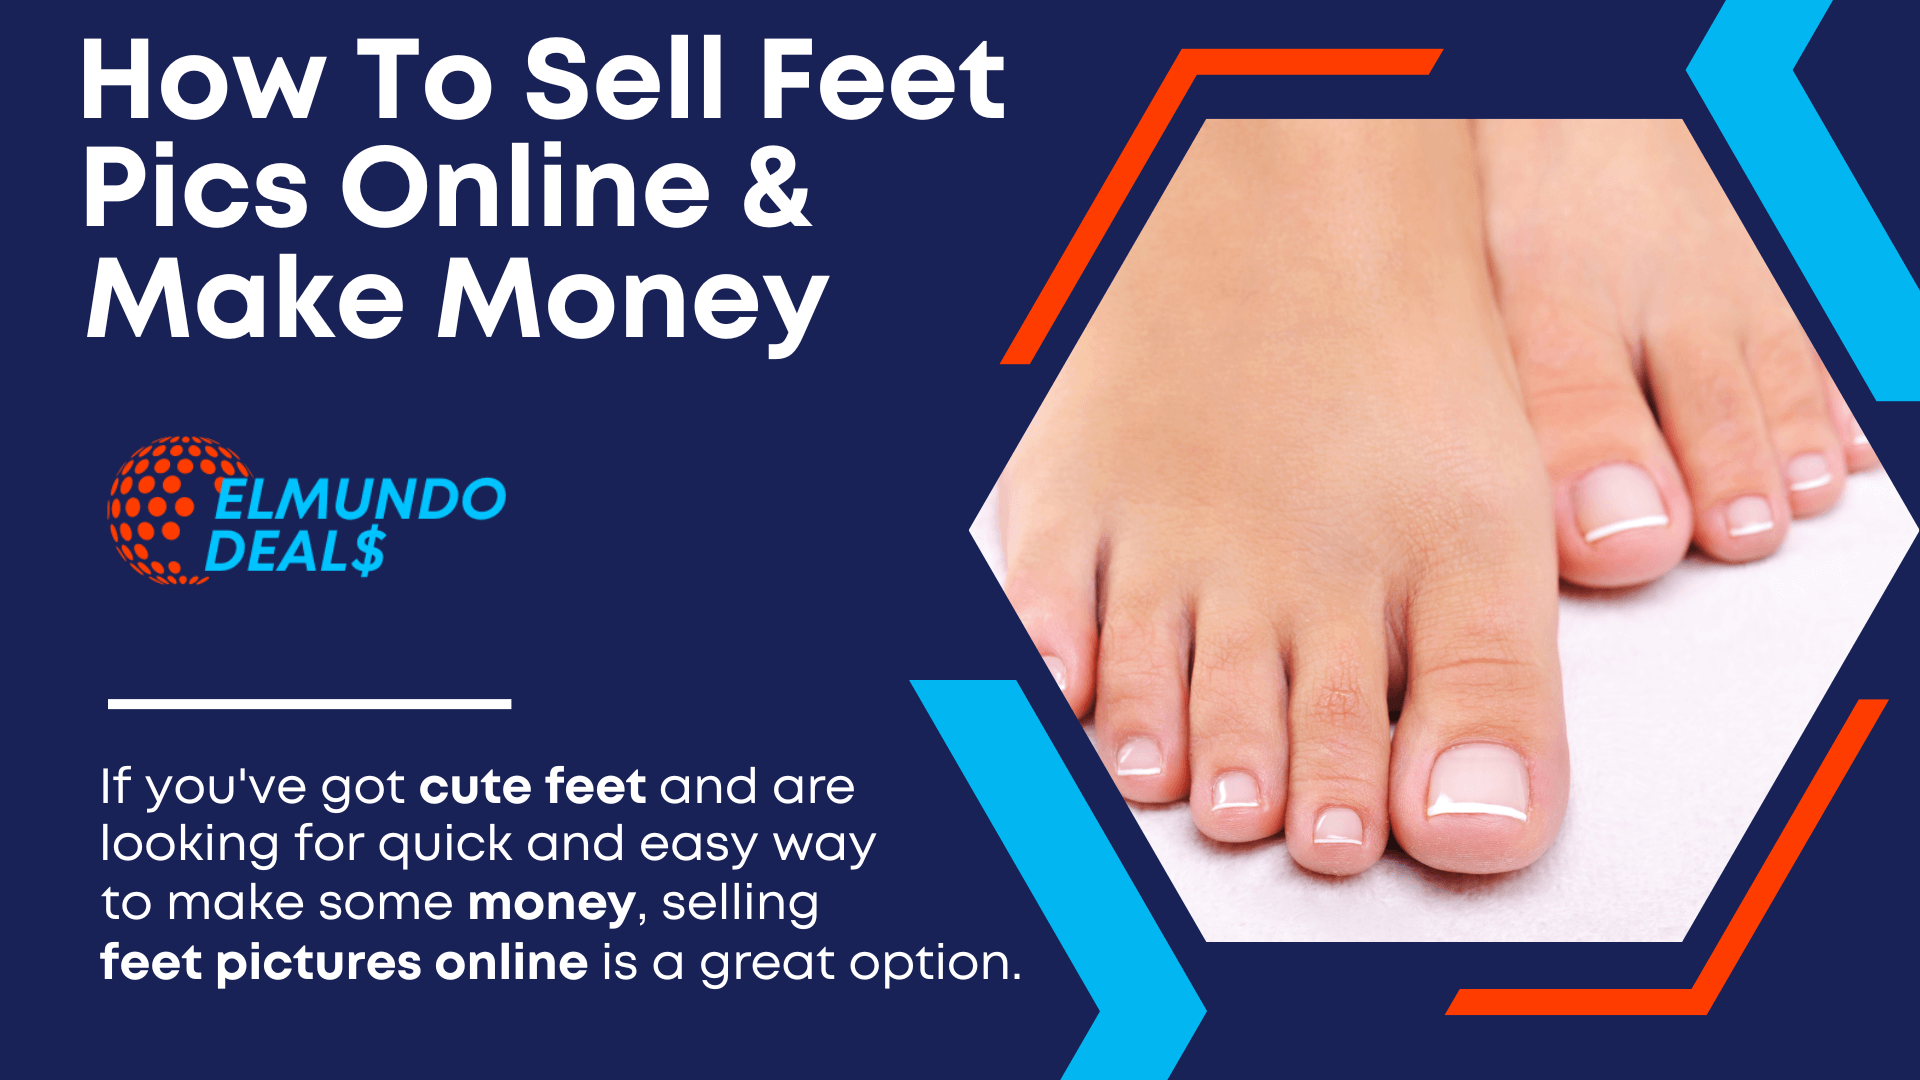 How To Sell Feet Pics Online And Make Money Quick - 2023 Guideline